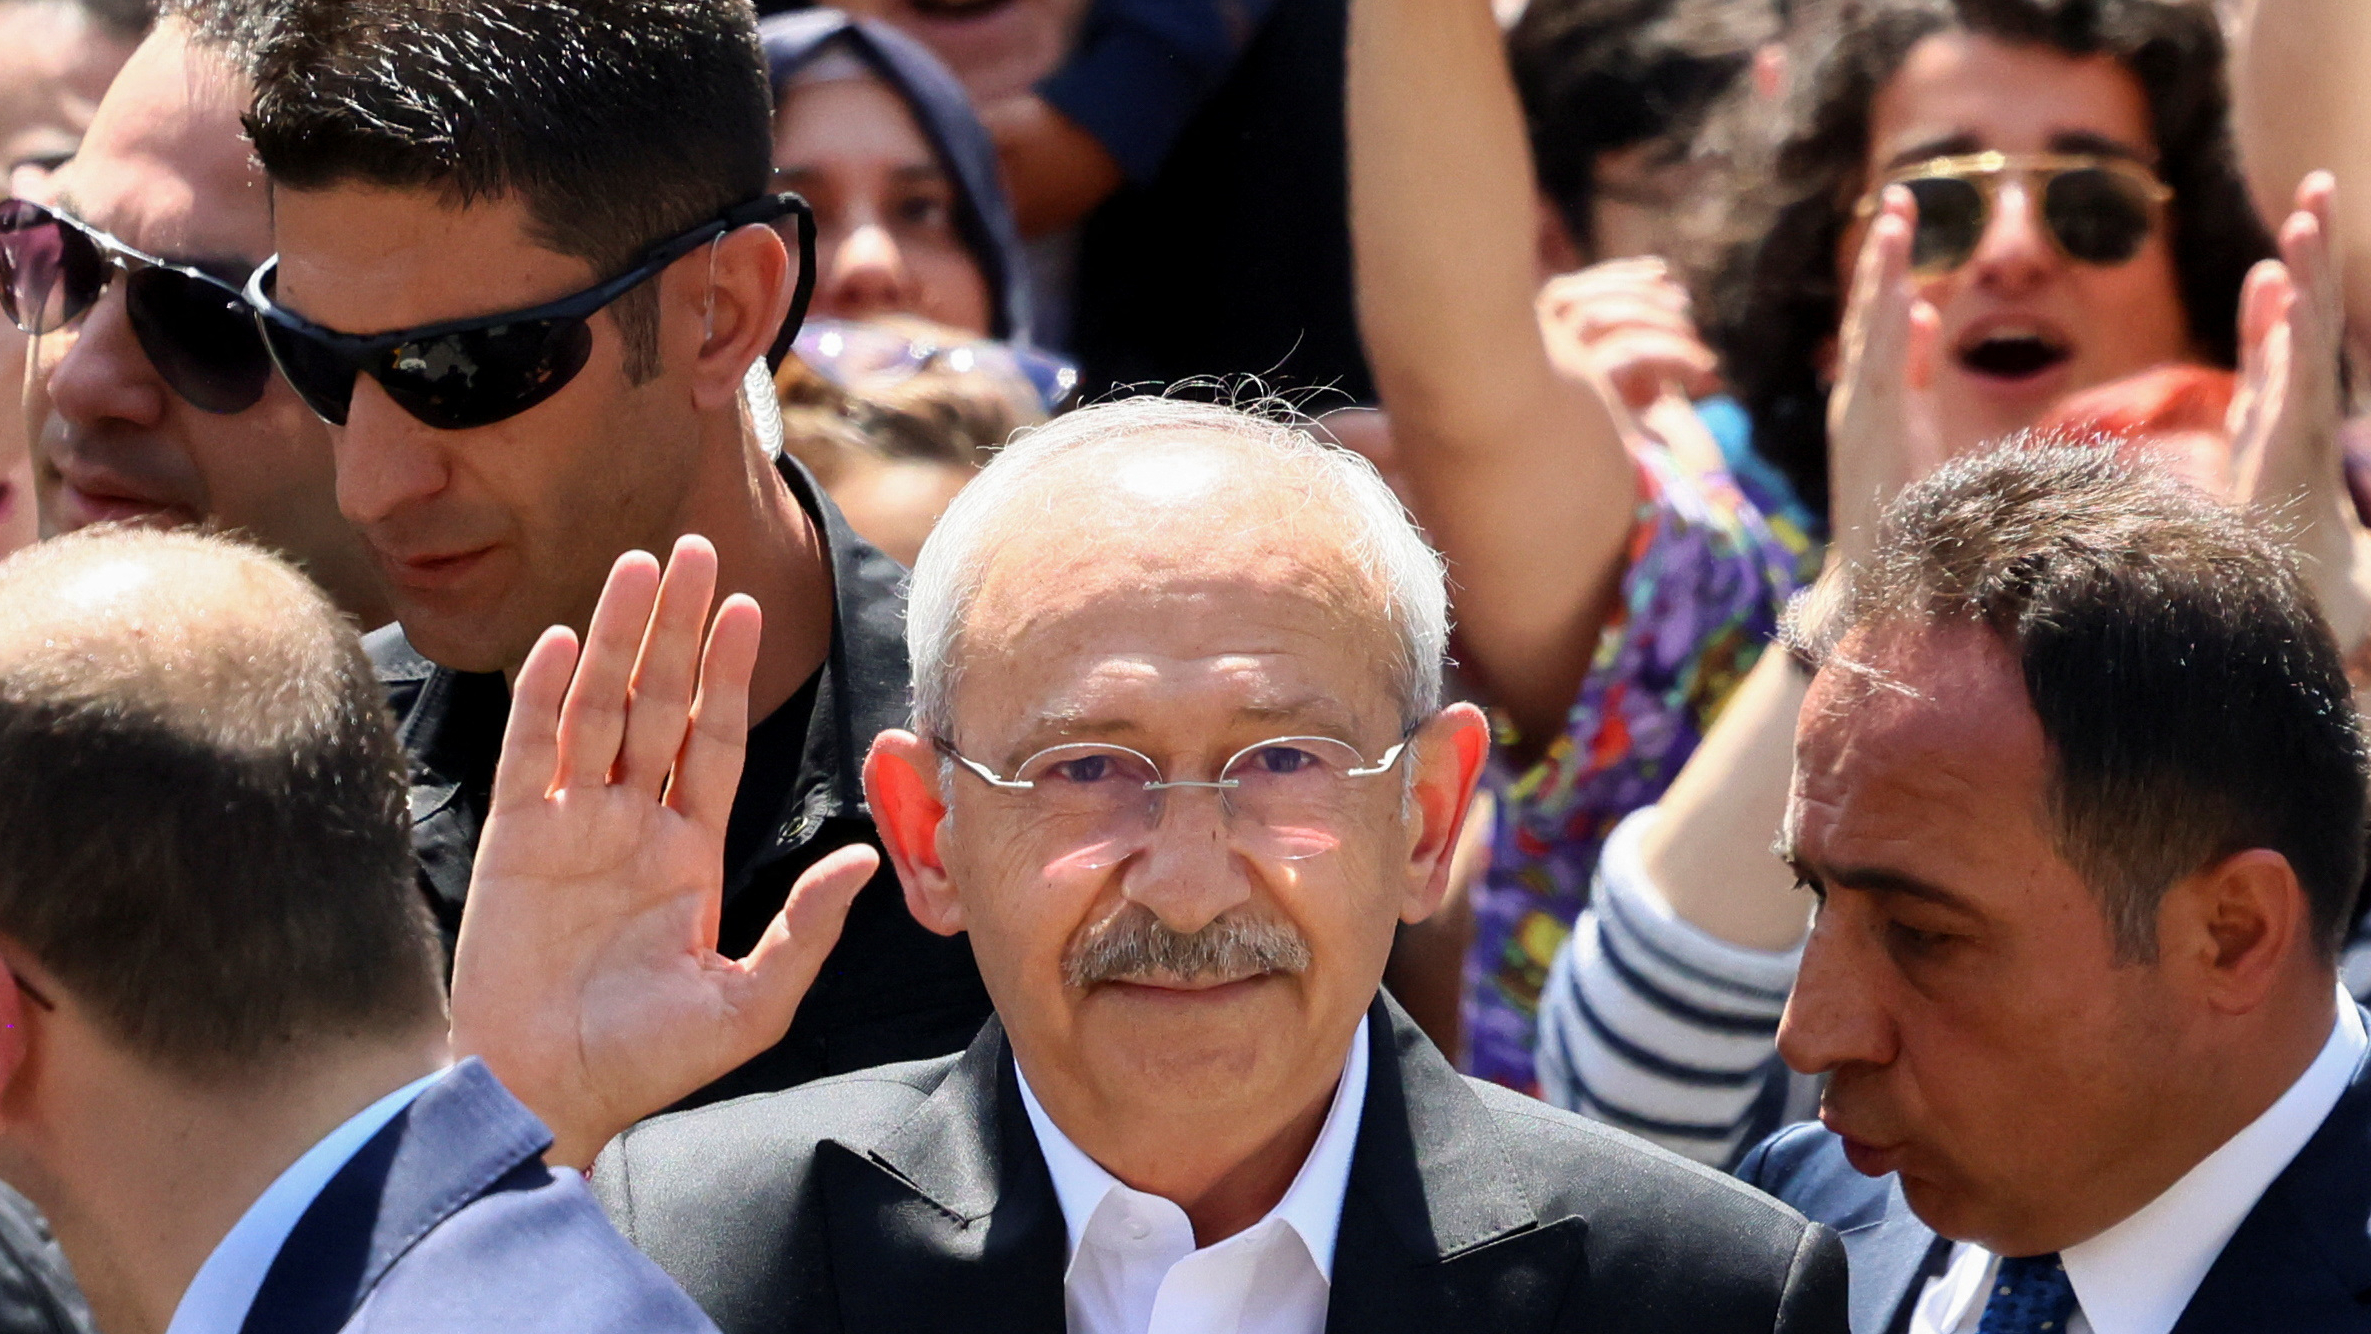 Kemal Kilicdaroglu, presidential candidate of the main opposition alliance, voted in Ankara earlier on Sunday. /Yves Herman/Reuters